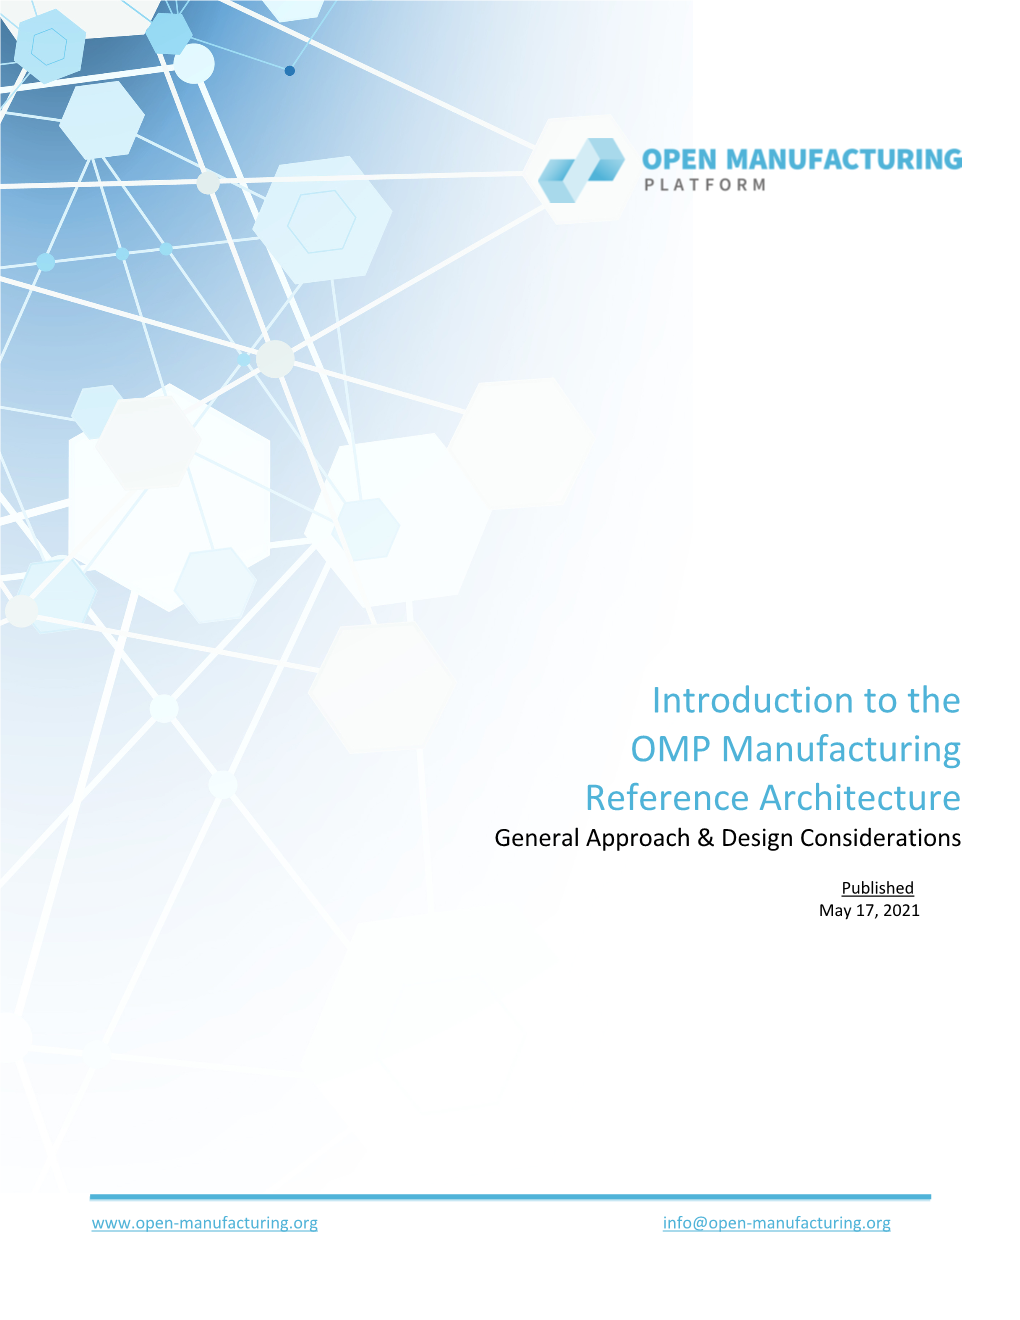 Introduction to the OMP Manufacturing Reference Architecture General Approach & Design Considerations